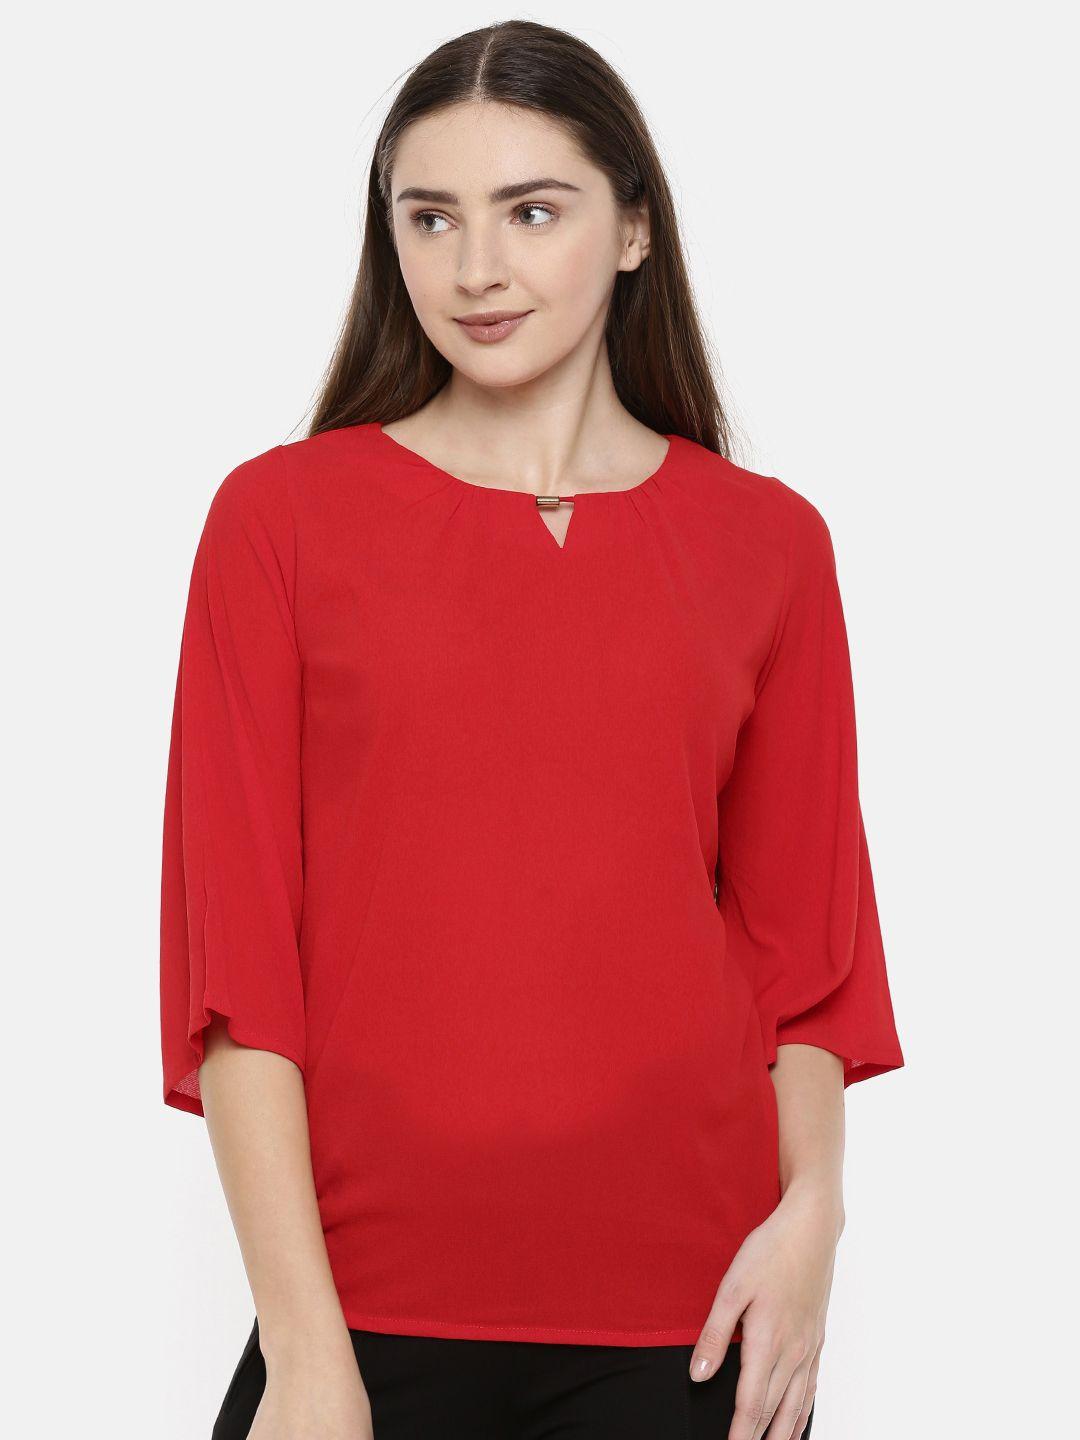 park-avenue-women-red-solid-top